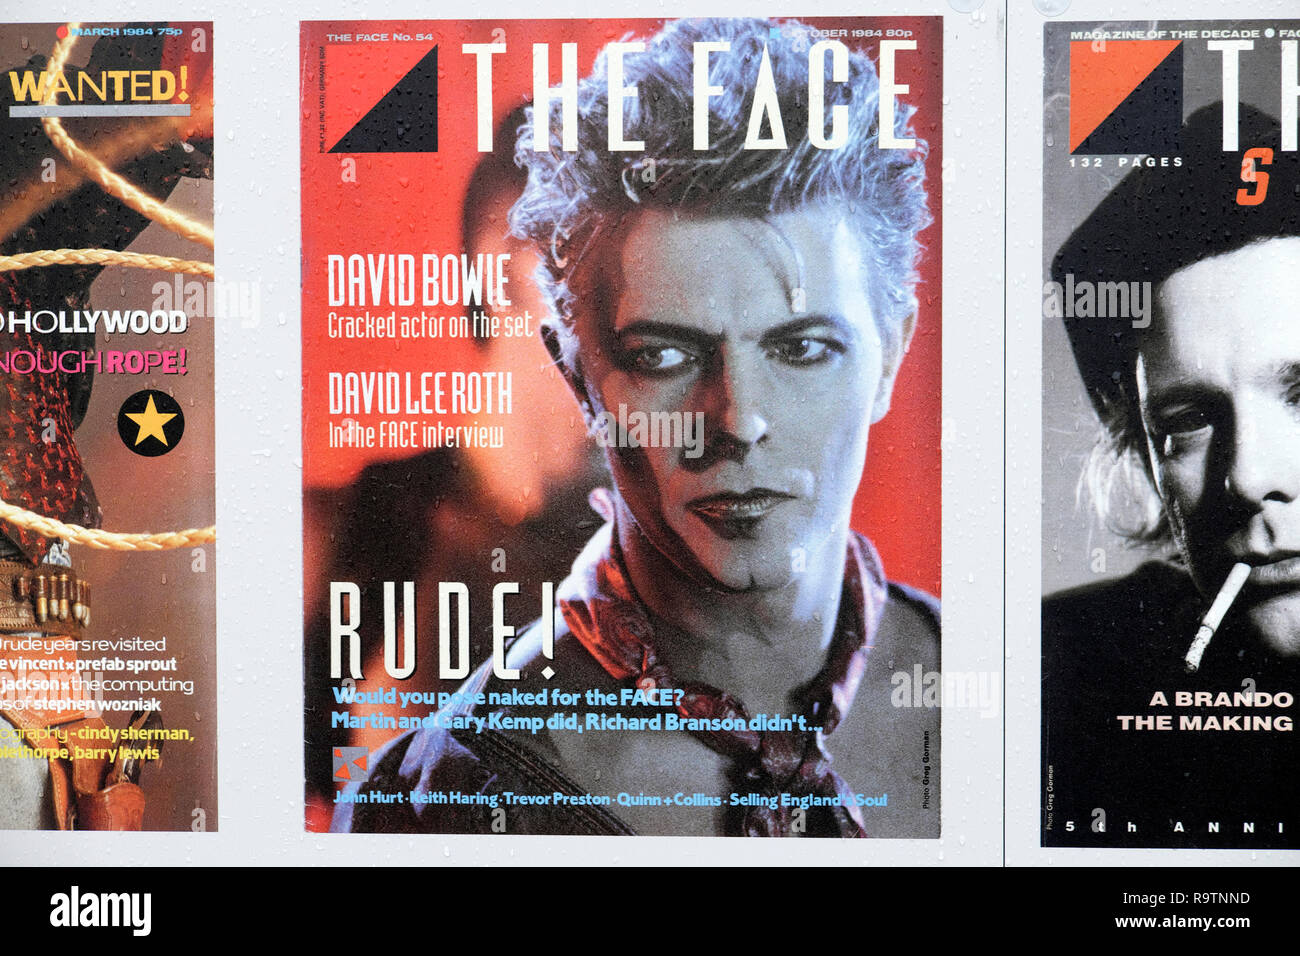 Bailarín transportar llave inglesa David Bowie at The FACE COVERS ARCHIVE magazine covers exhibition in Lewis  Cubitt Square Coal Drops Yard area Kings Cross London NC1 UK KATHY DEWITT  Stock Photo - Alamy